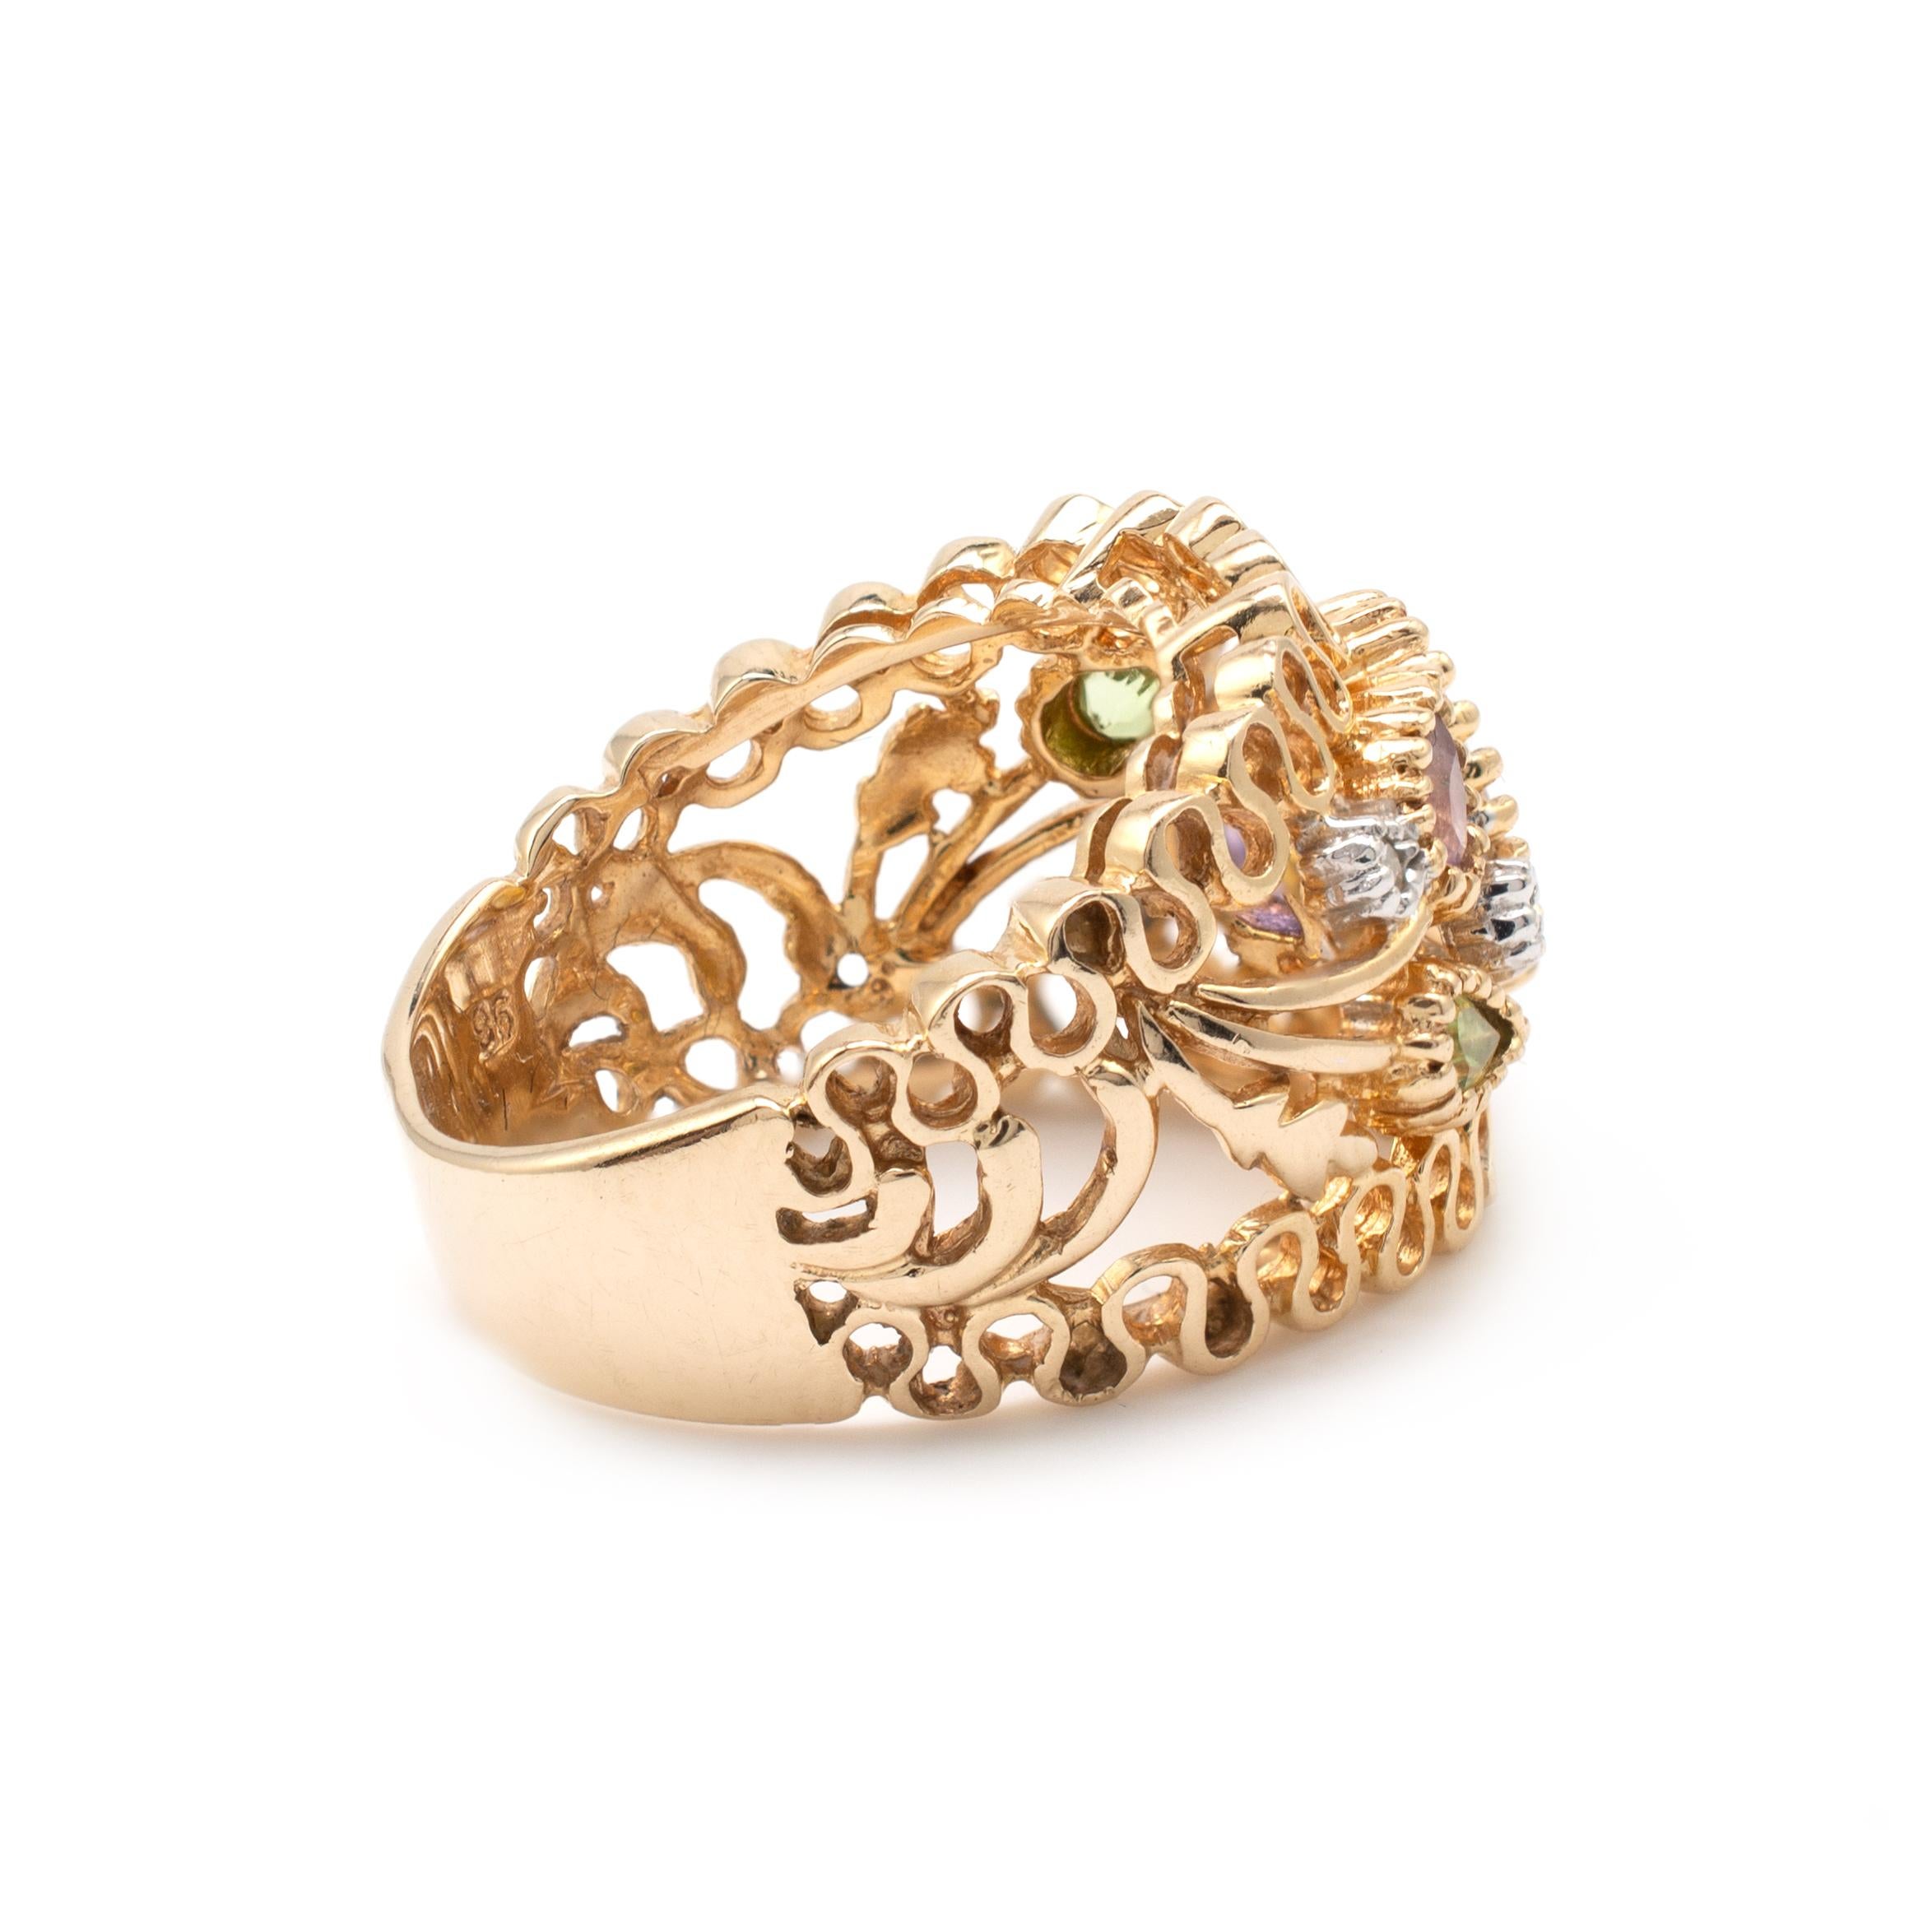 Mixed Gemstone Open Flower Bombe Cocktail Ring 14 Karat Gold With Pleated Edges For Sale 3